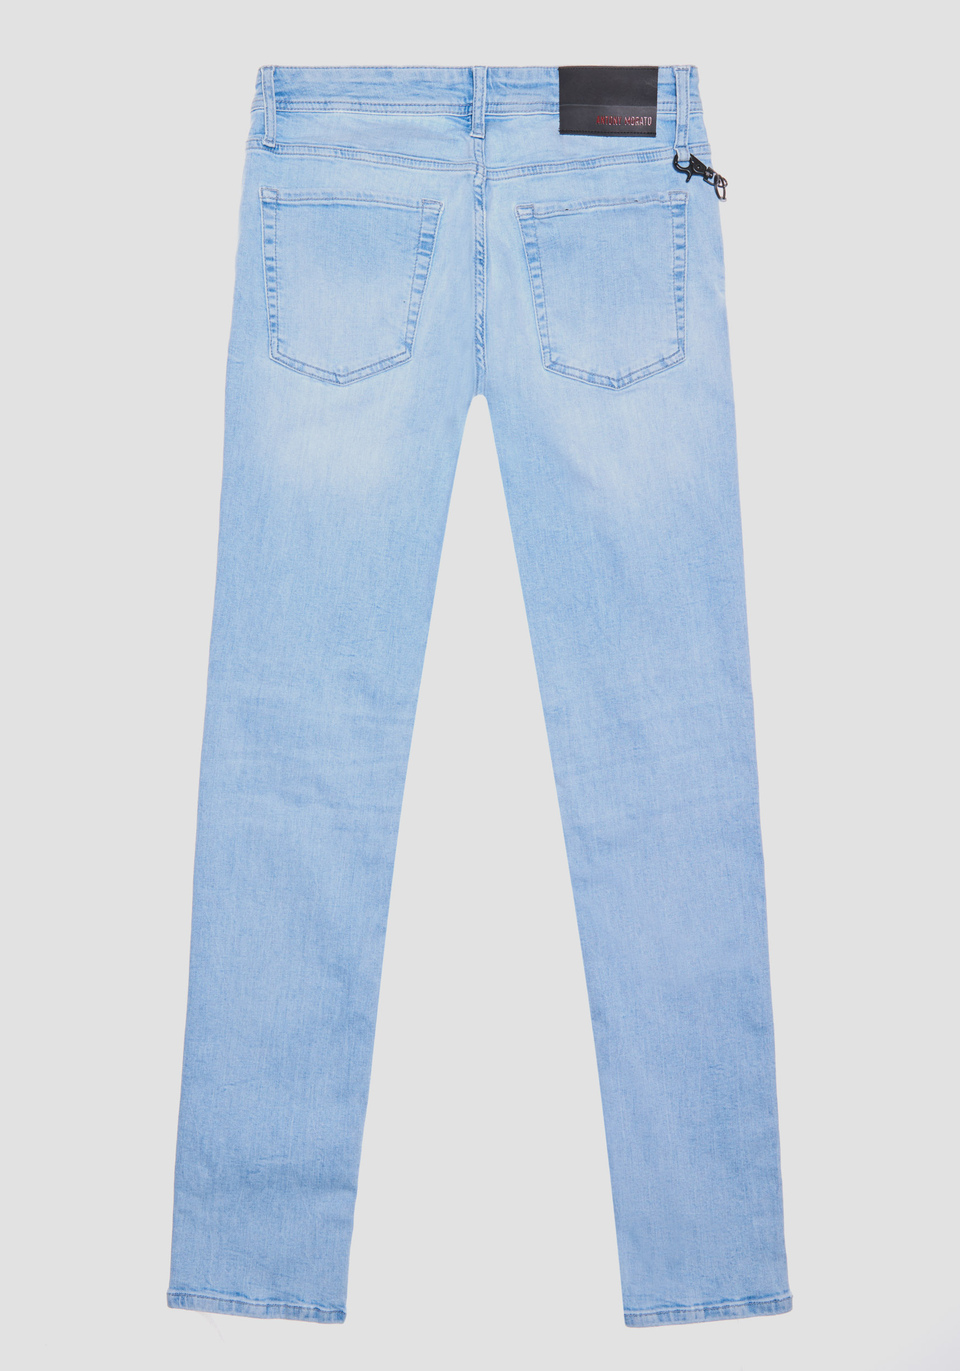 "IGGY" TAPERED FIT JEANS IN STRETCH DENIM WITH LIGHT WASH - Antony Morato Online Shop